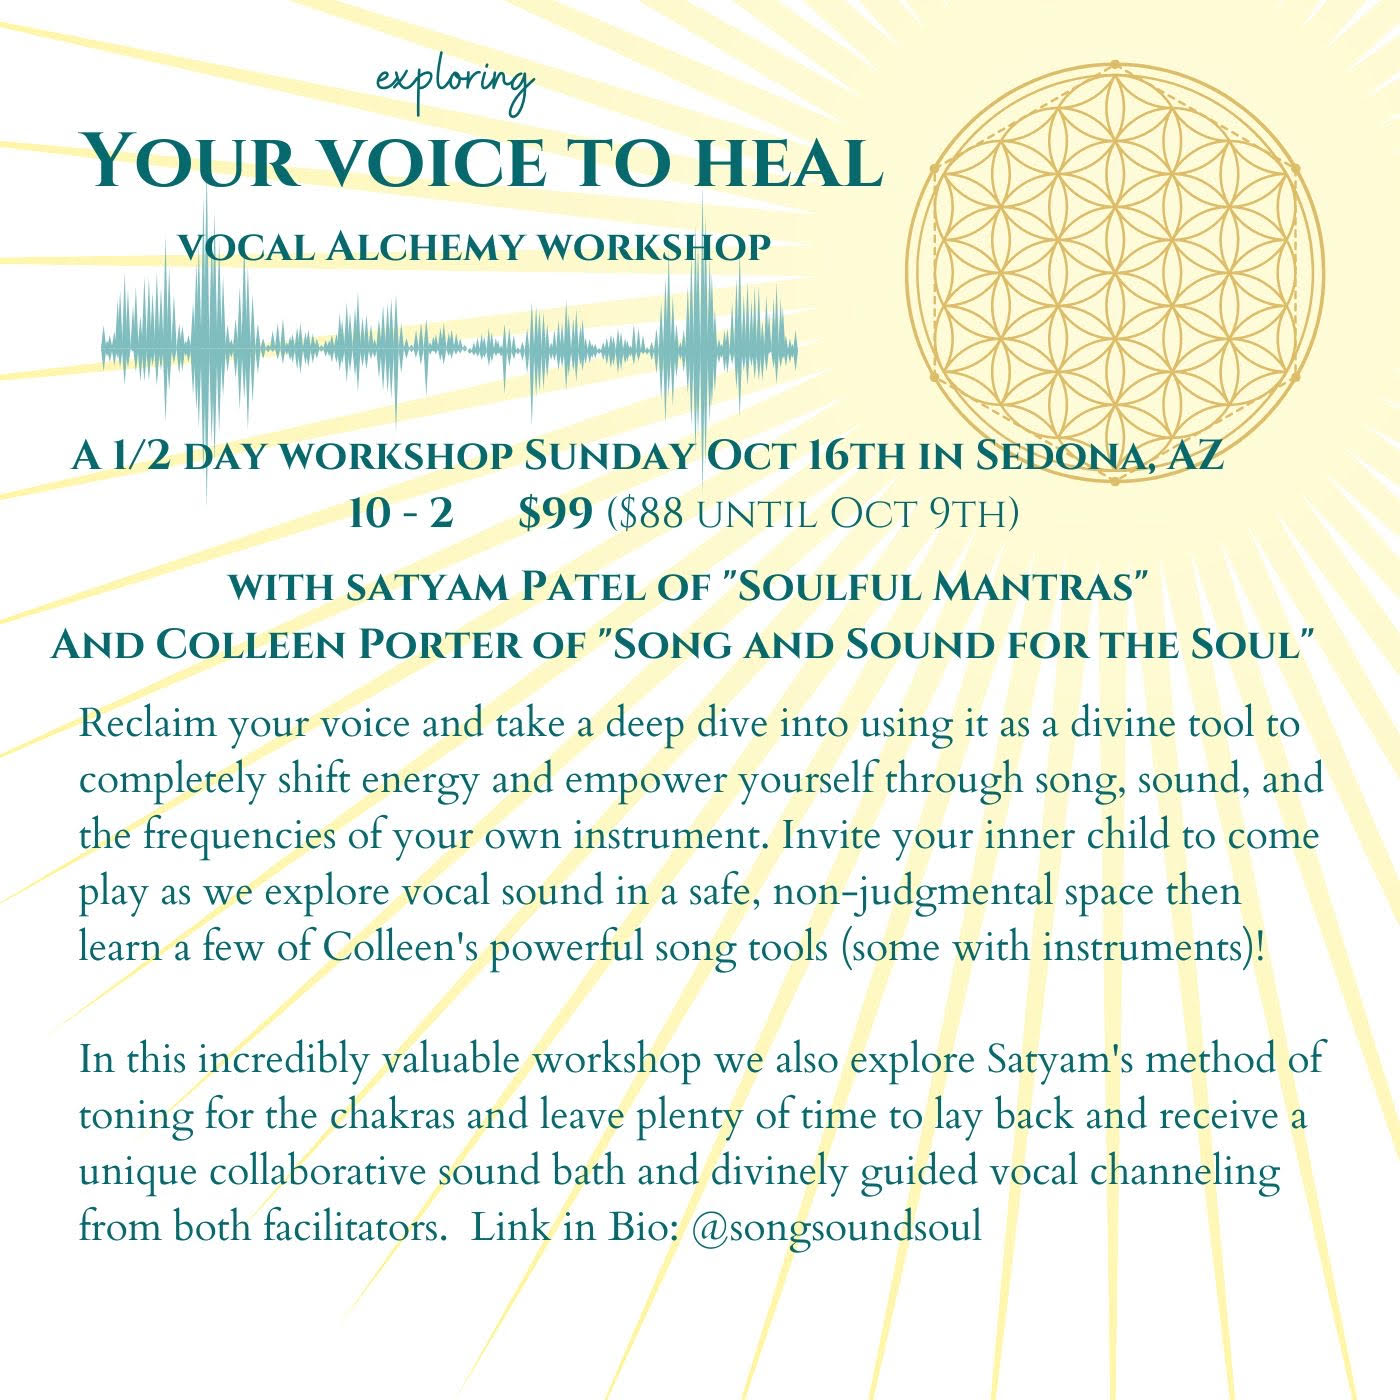 Join us for this AWESOME vocal alchemy workshop!